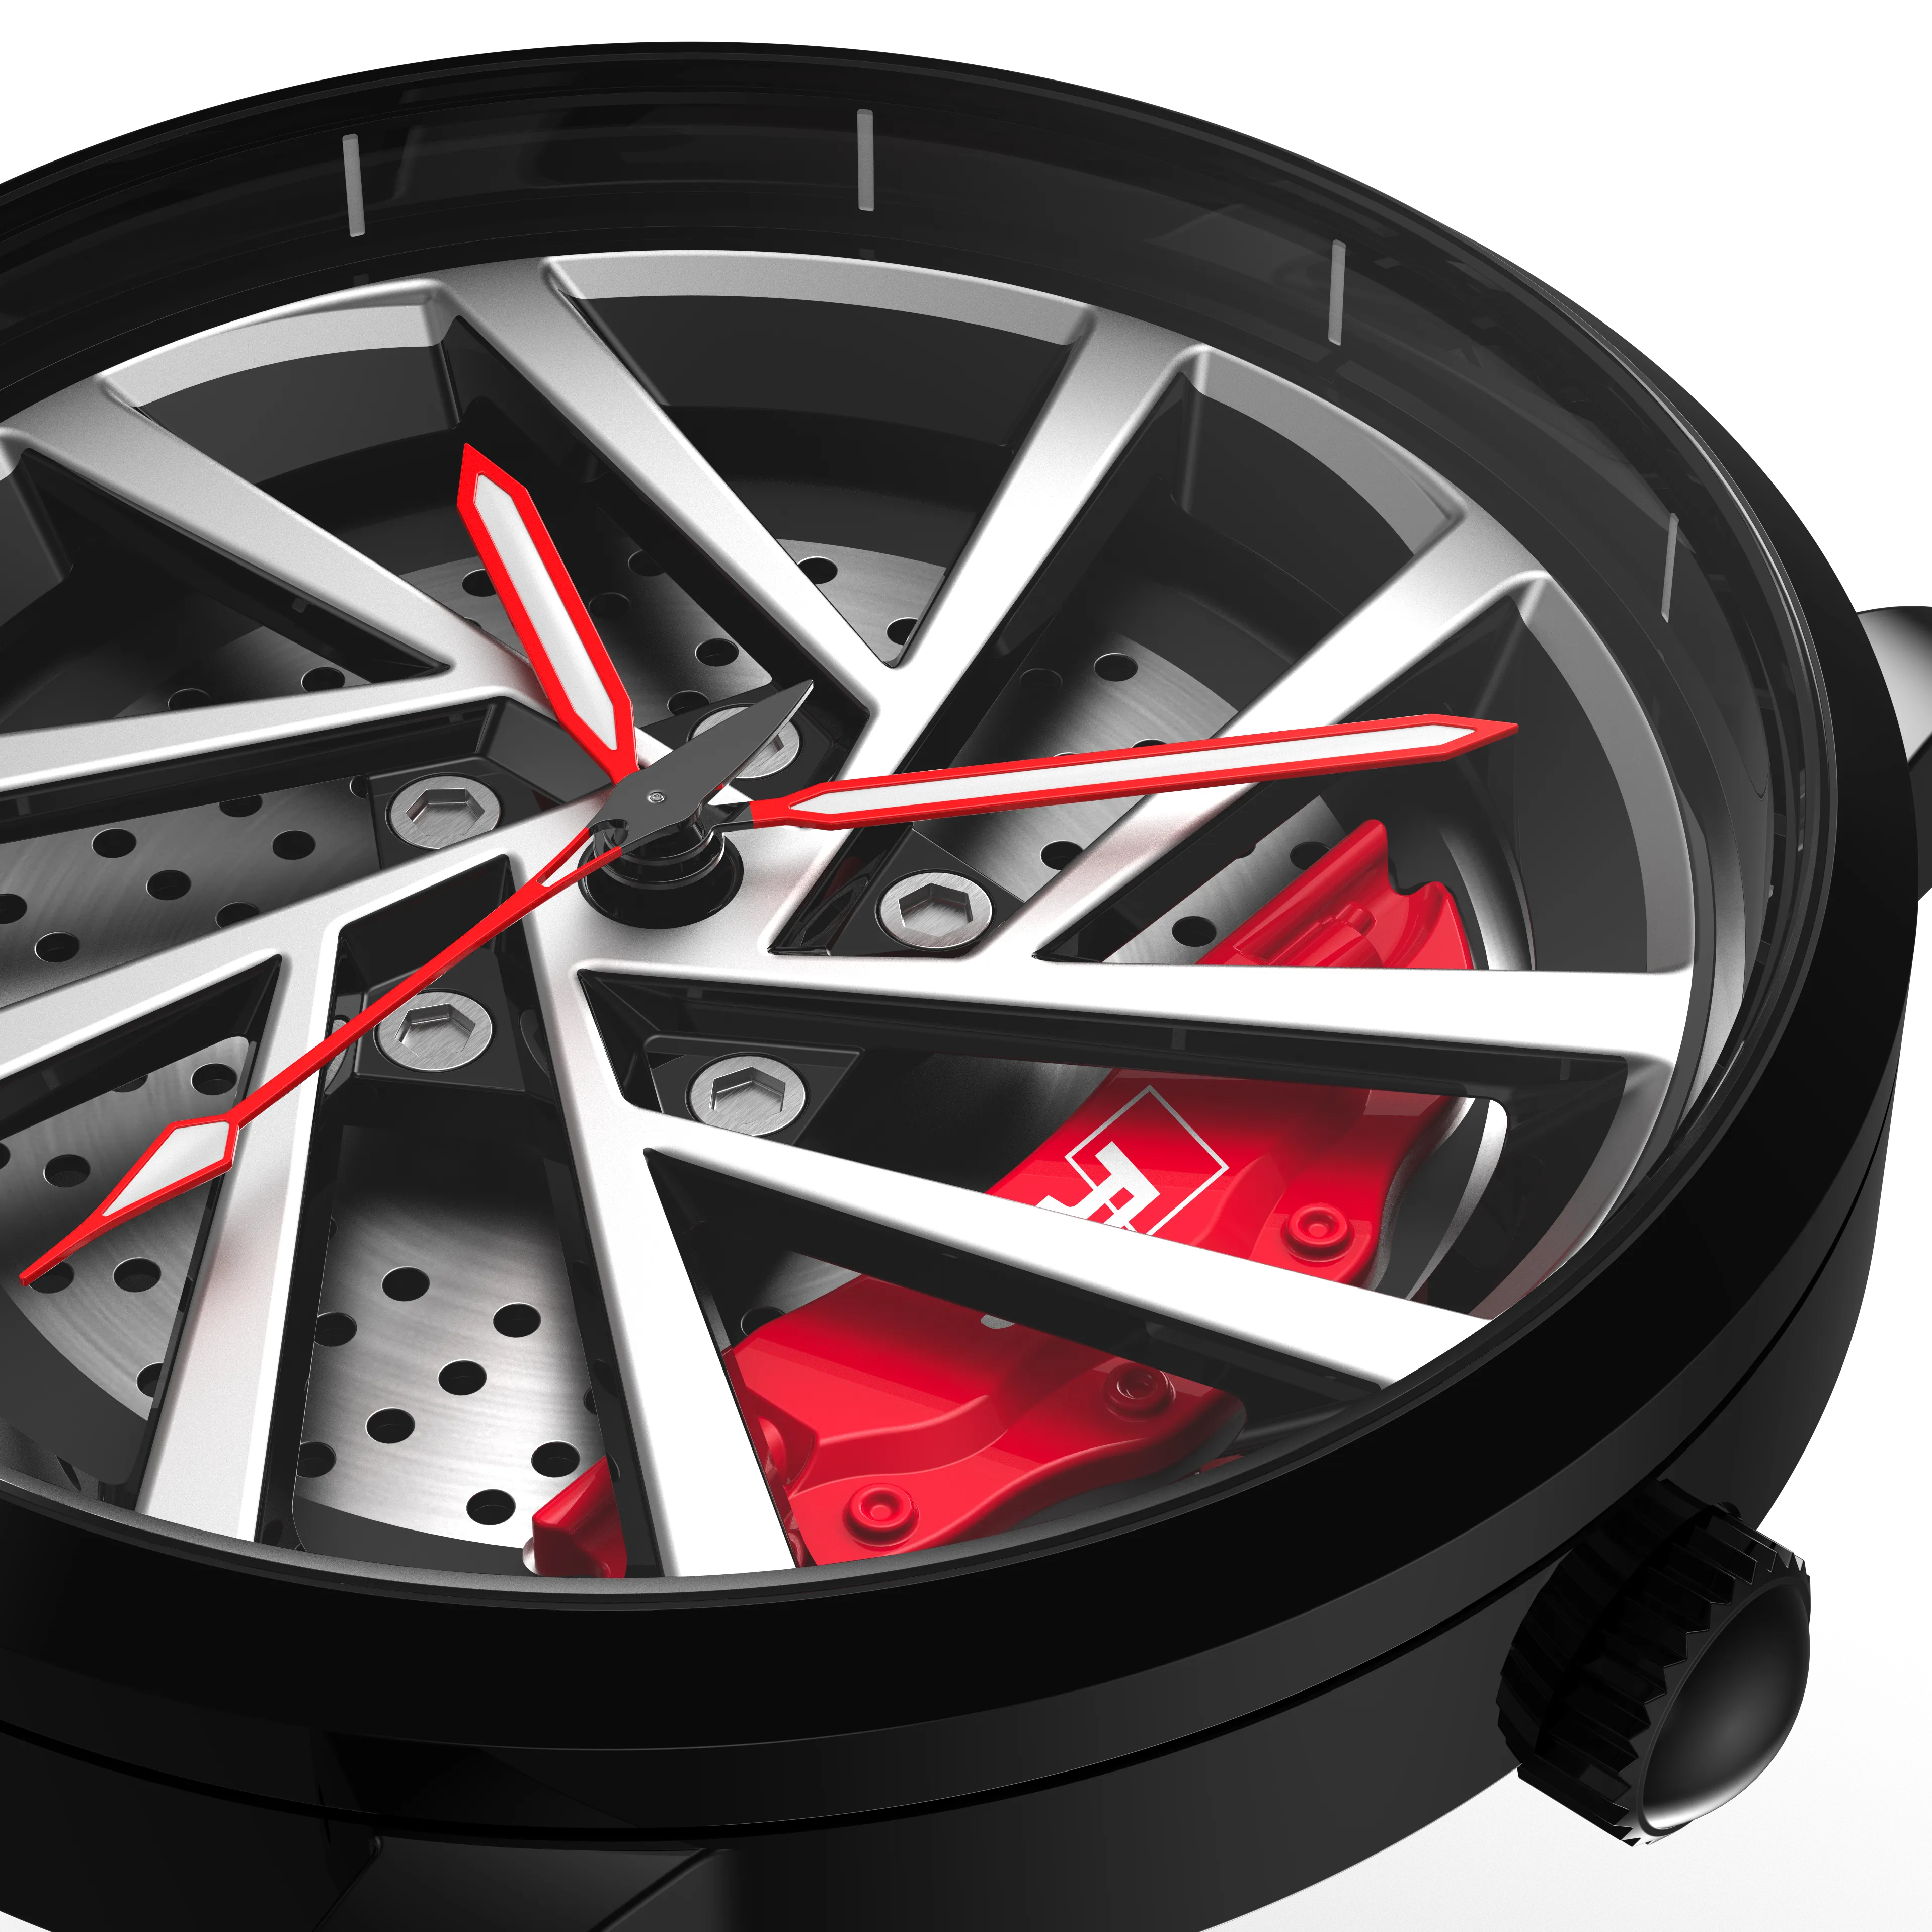 Shop Red Vorsprung RS5 Gyro - Red Leather Strap | RS Chrono